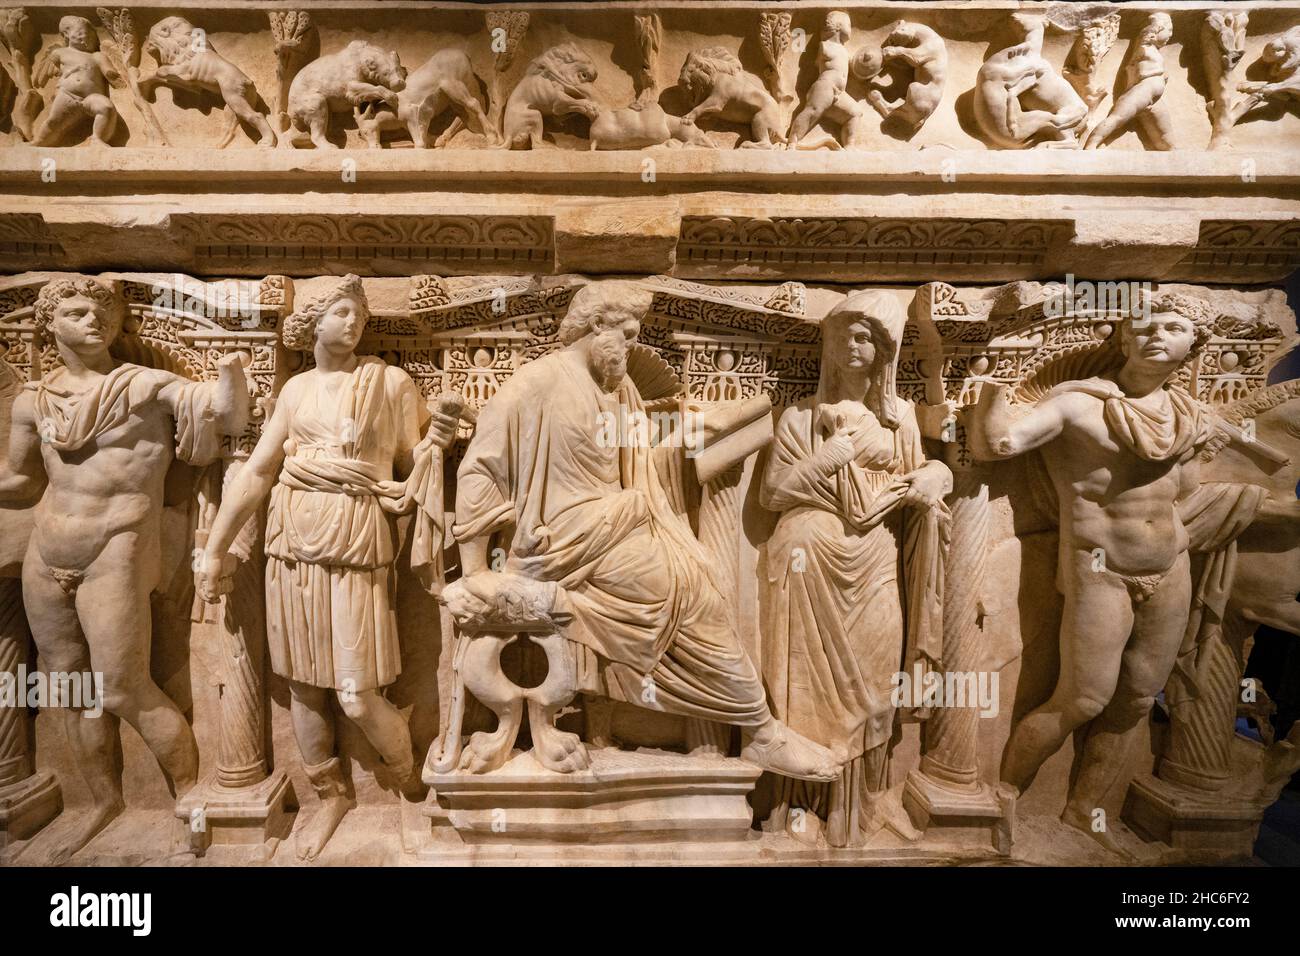 Detailed view of The Sarcophagus of Sidamara in Istanbul Archaeology Museum, Turkey. Stock Photo